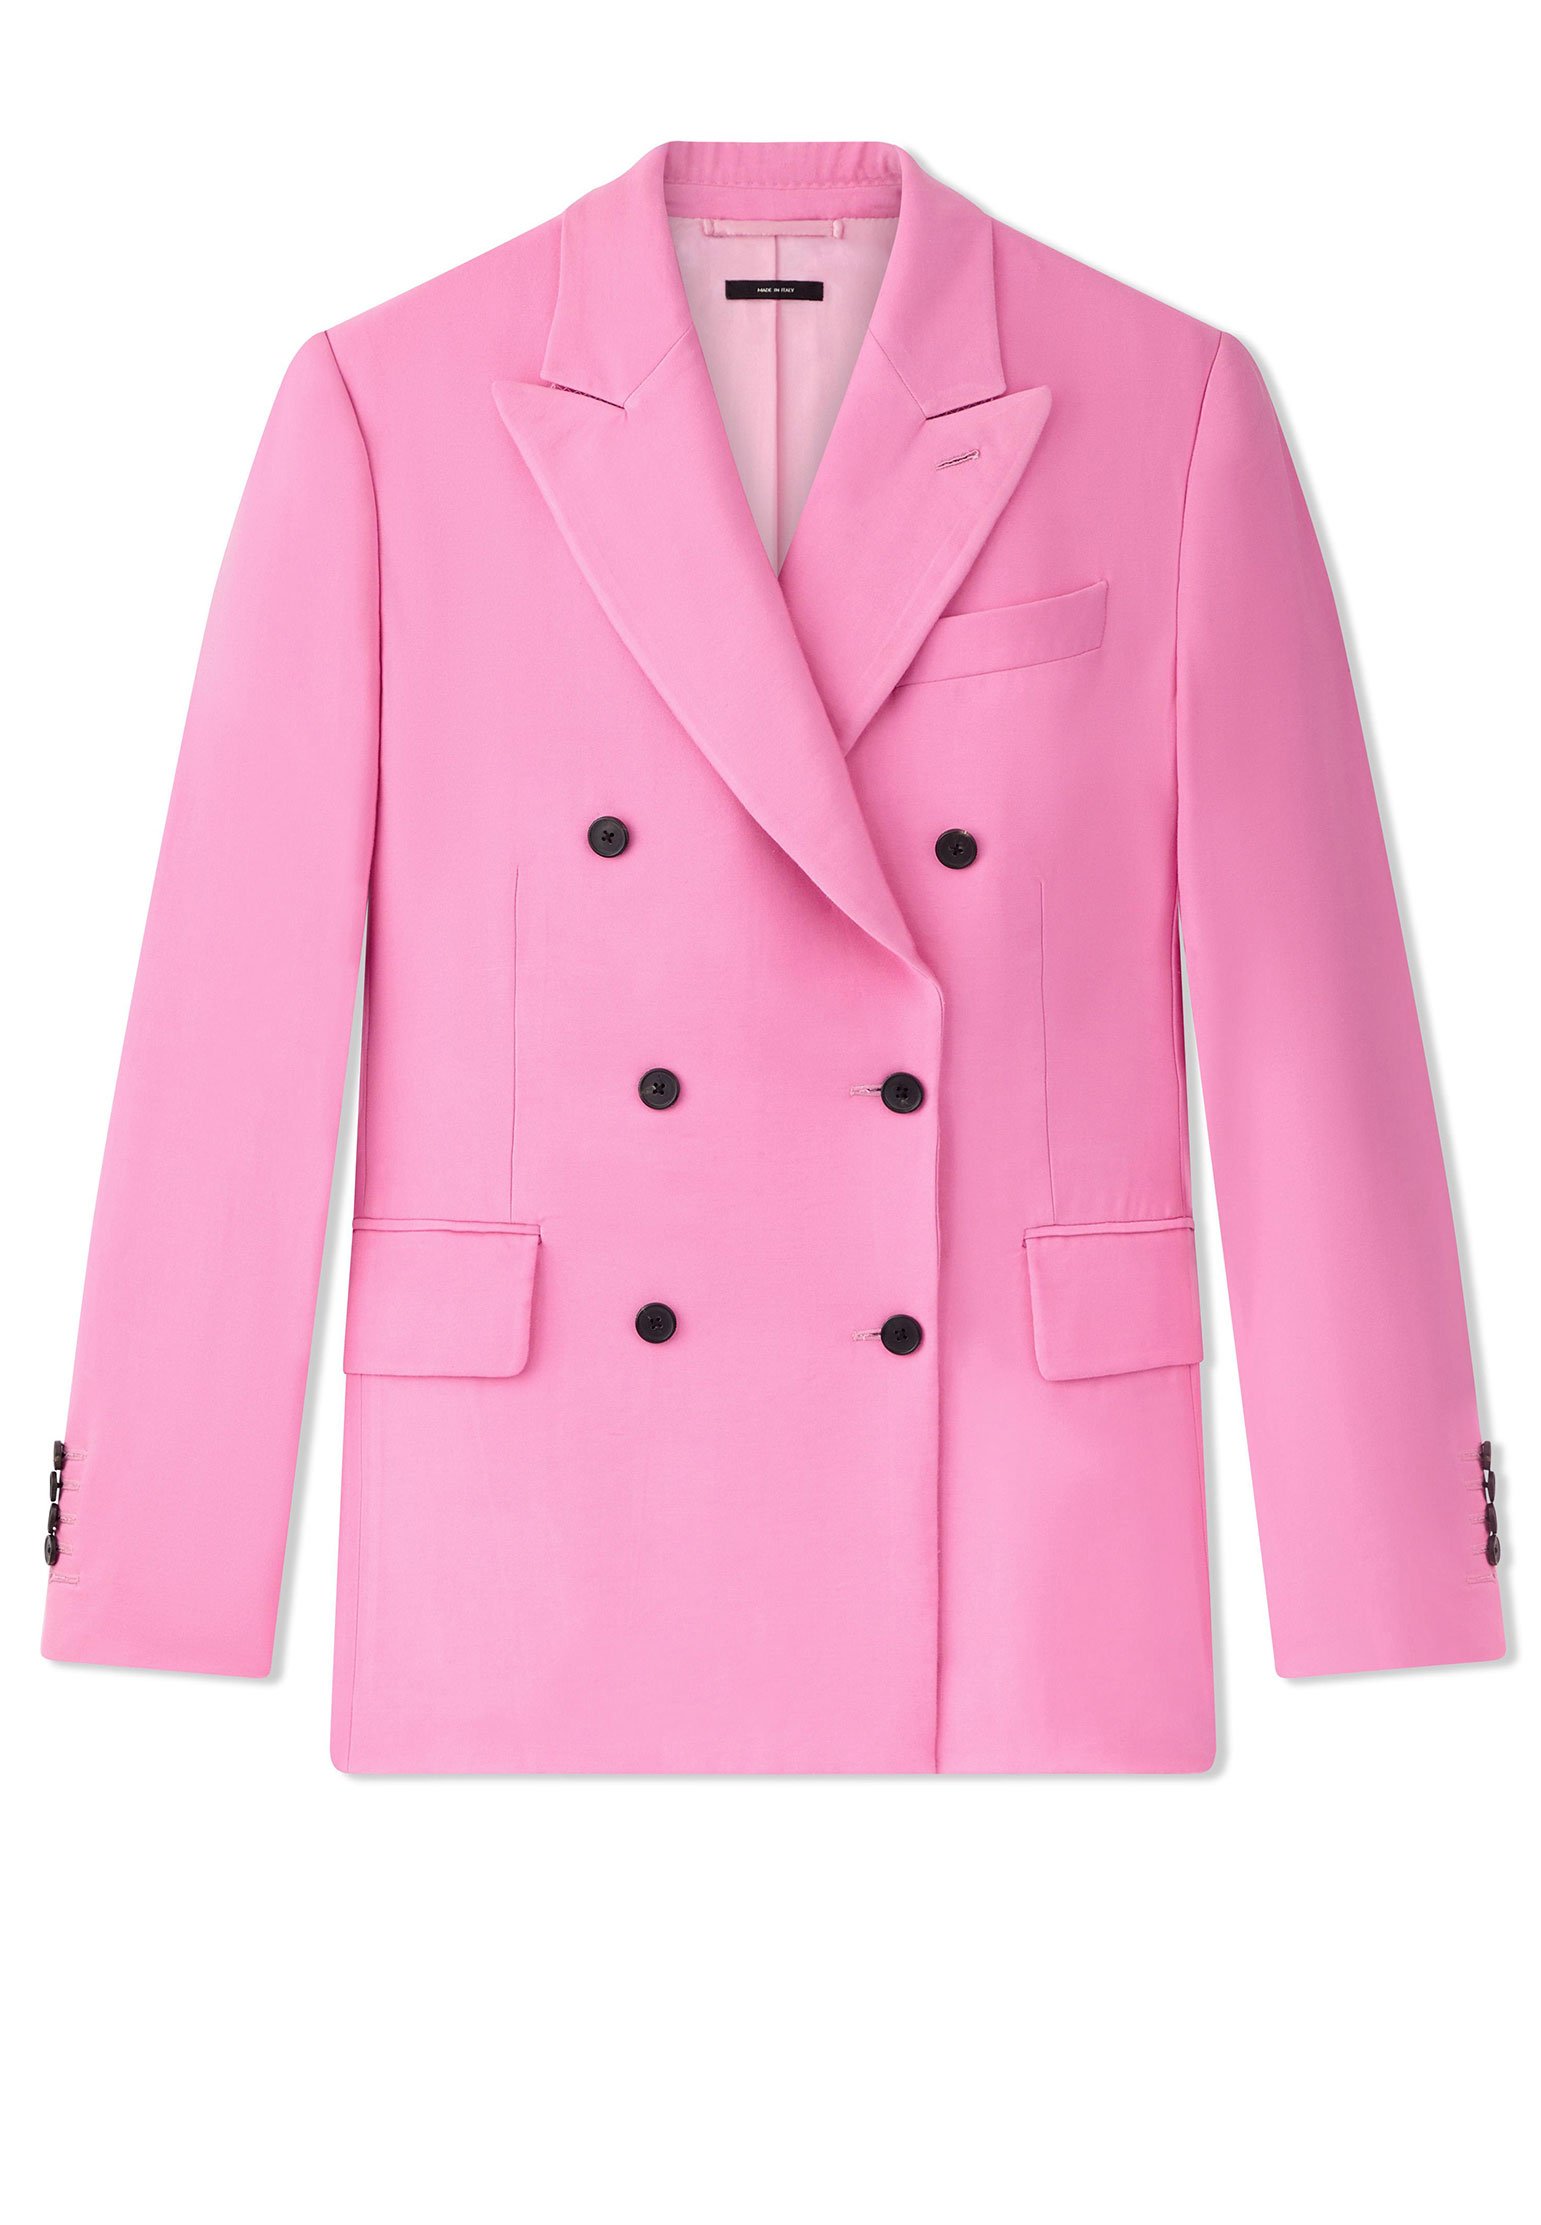 Jacket TOM FORD Color: poudre (Code: 1935) in online store Allure